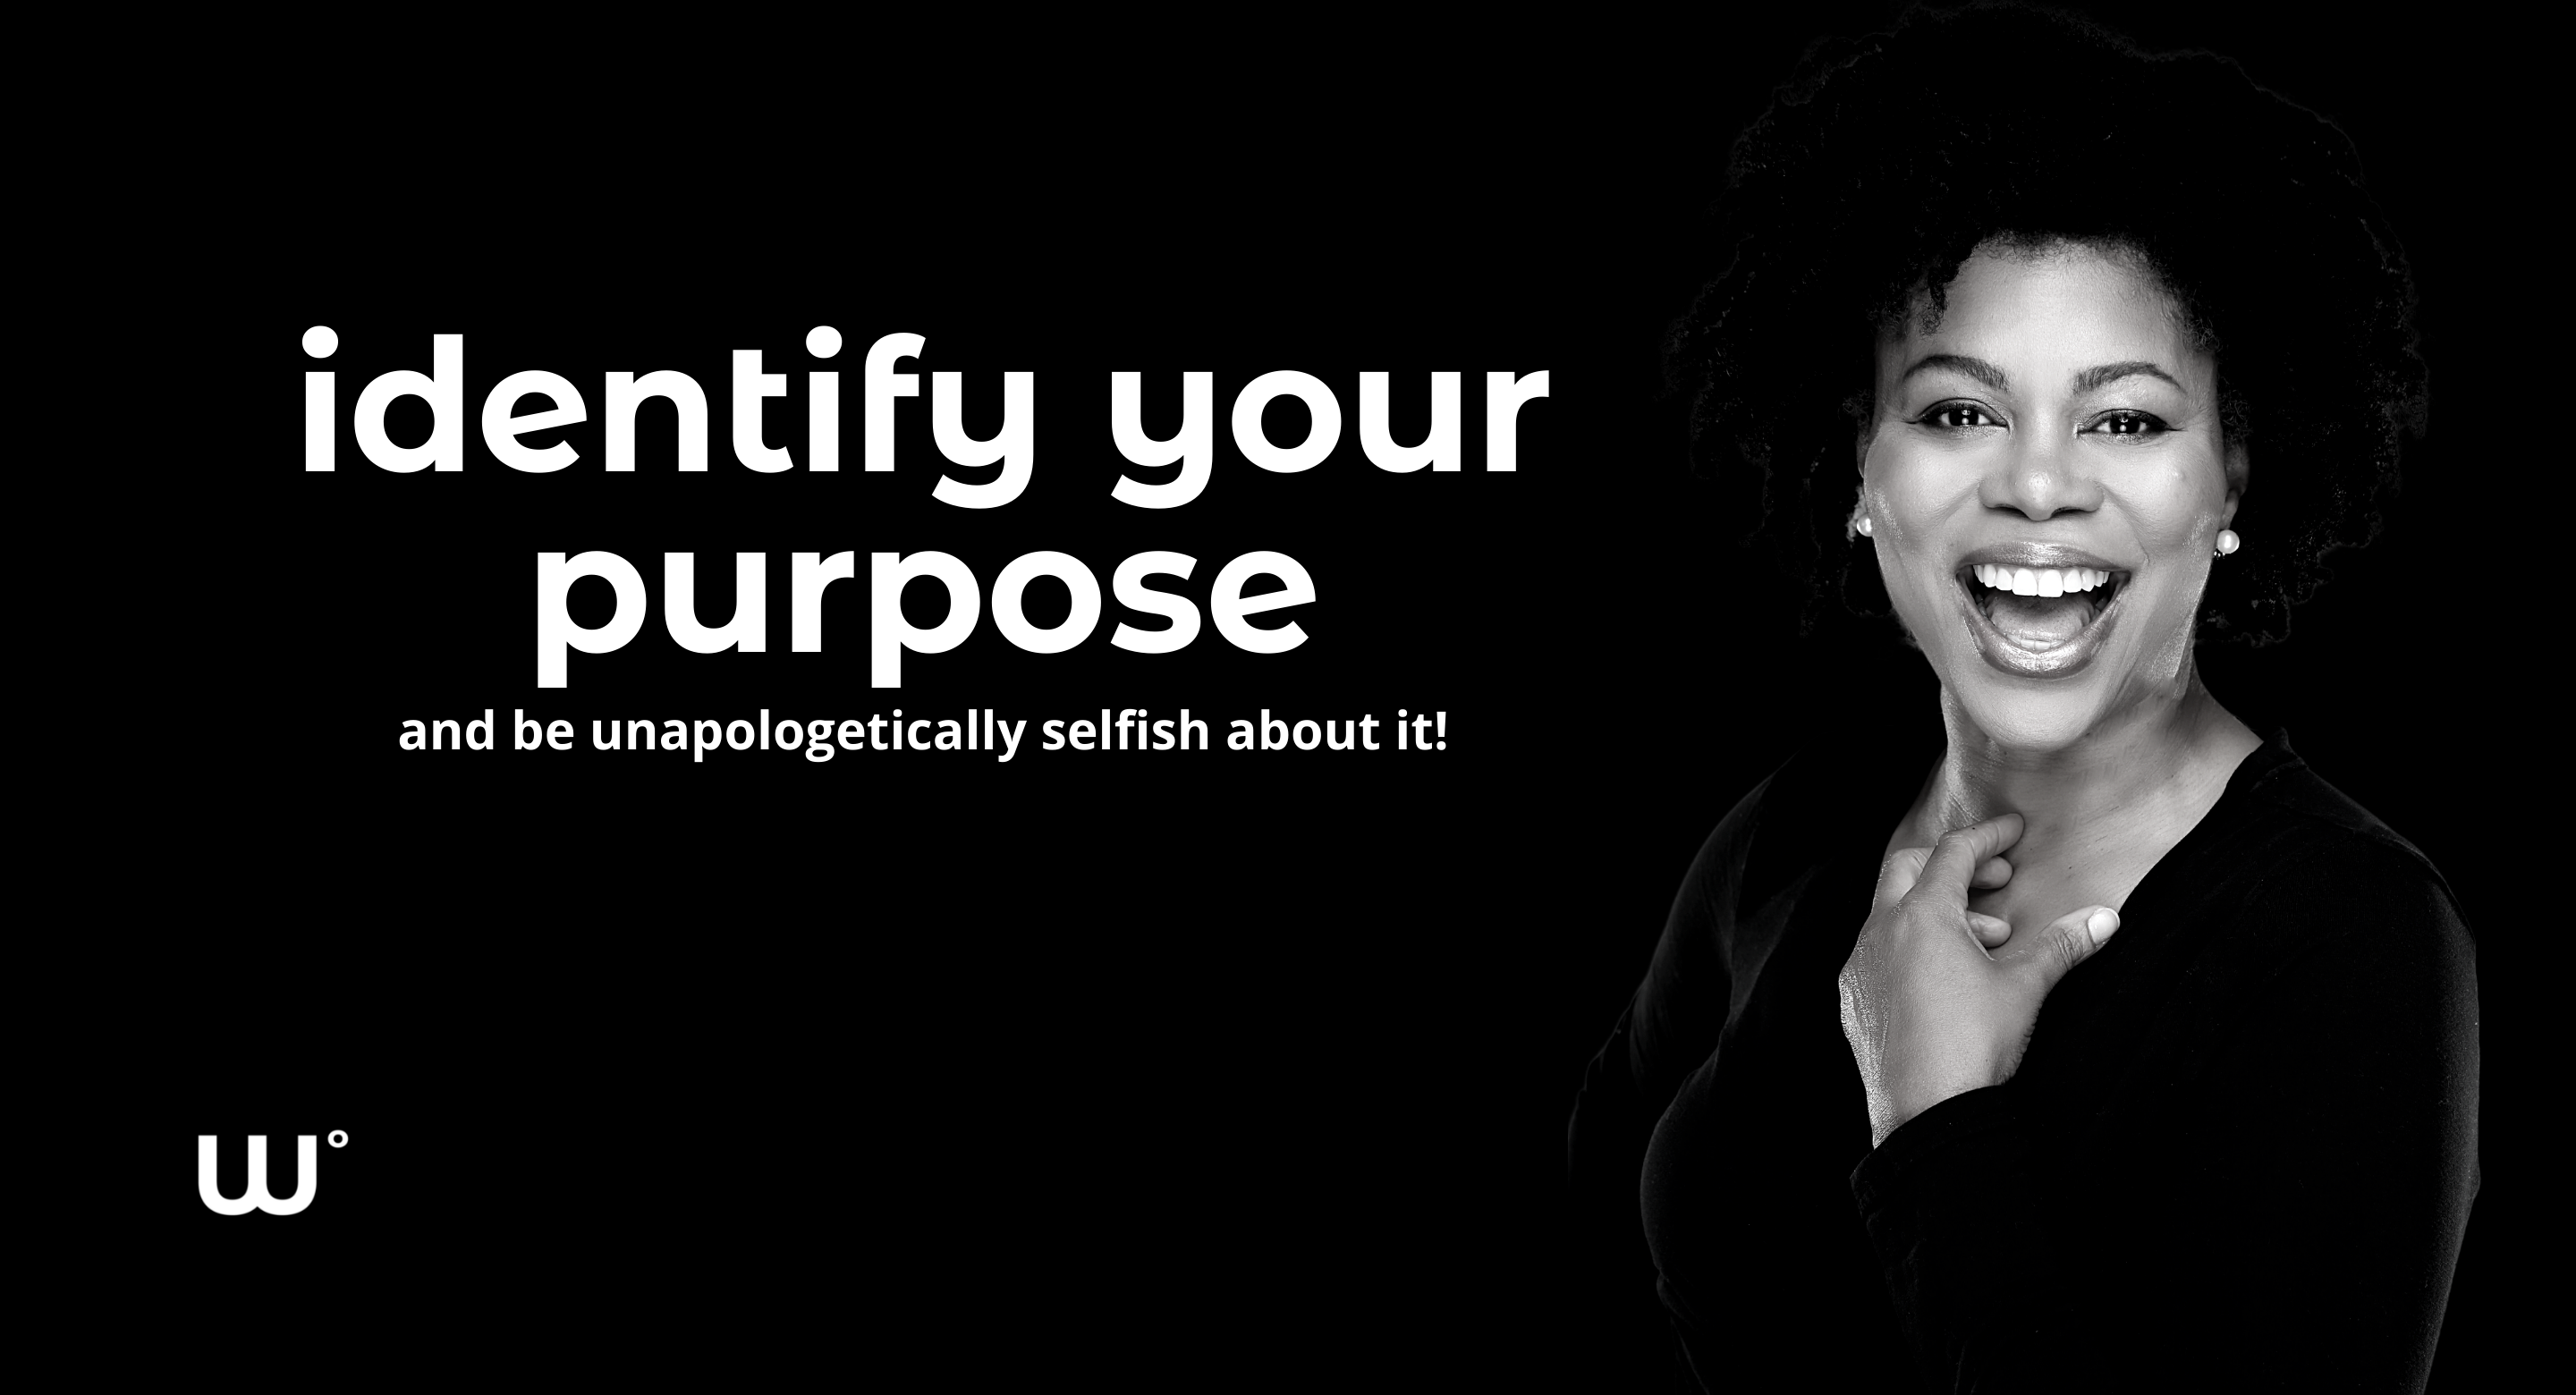 How to find my purpose in life and work course - personal and professional development courses